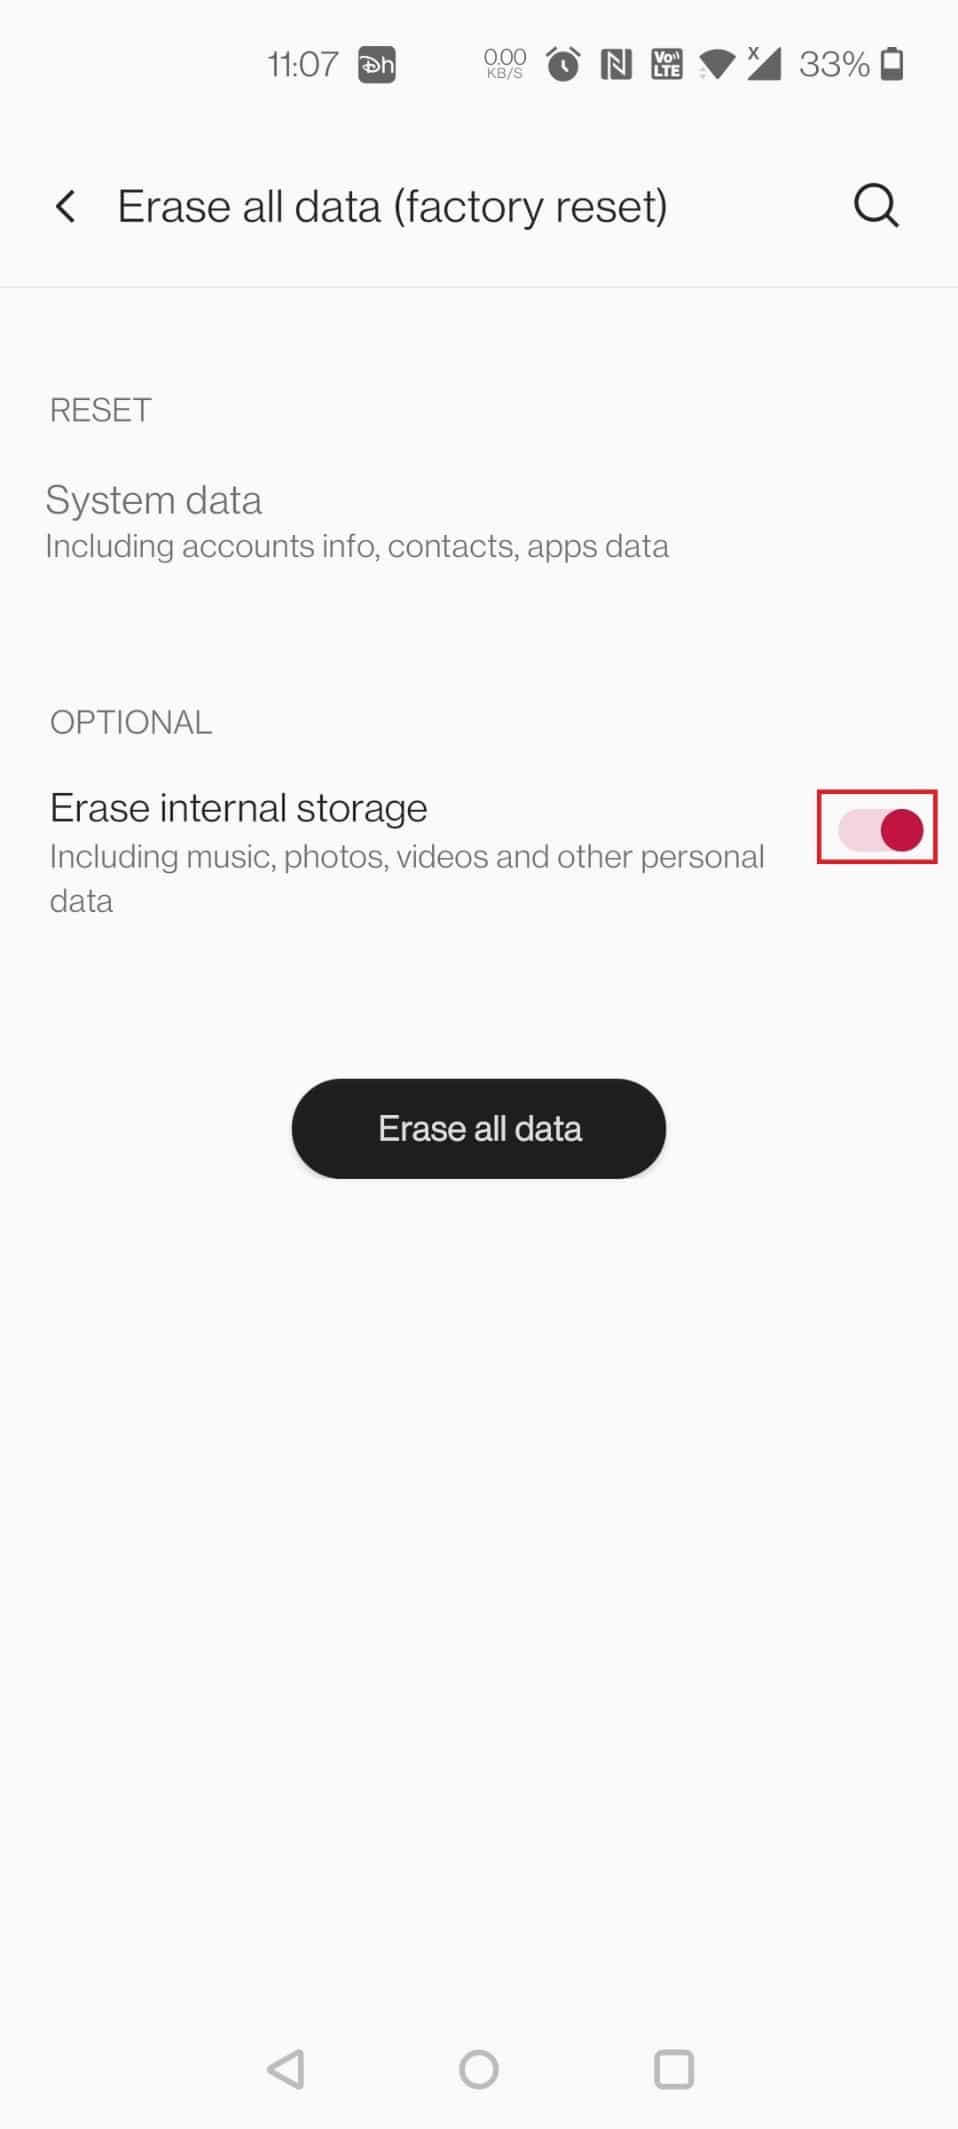 Turn off the toggle for the option Erase internal storage to create a backup of your data